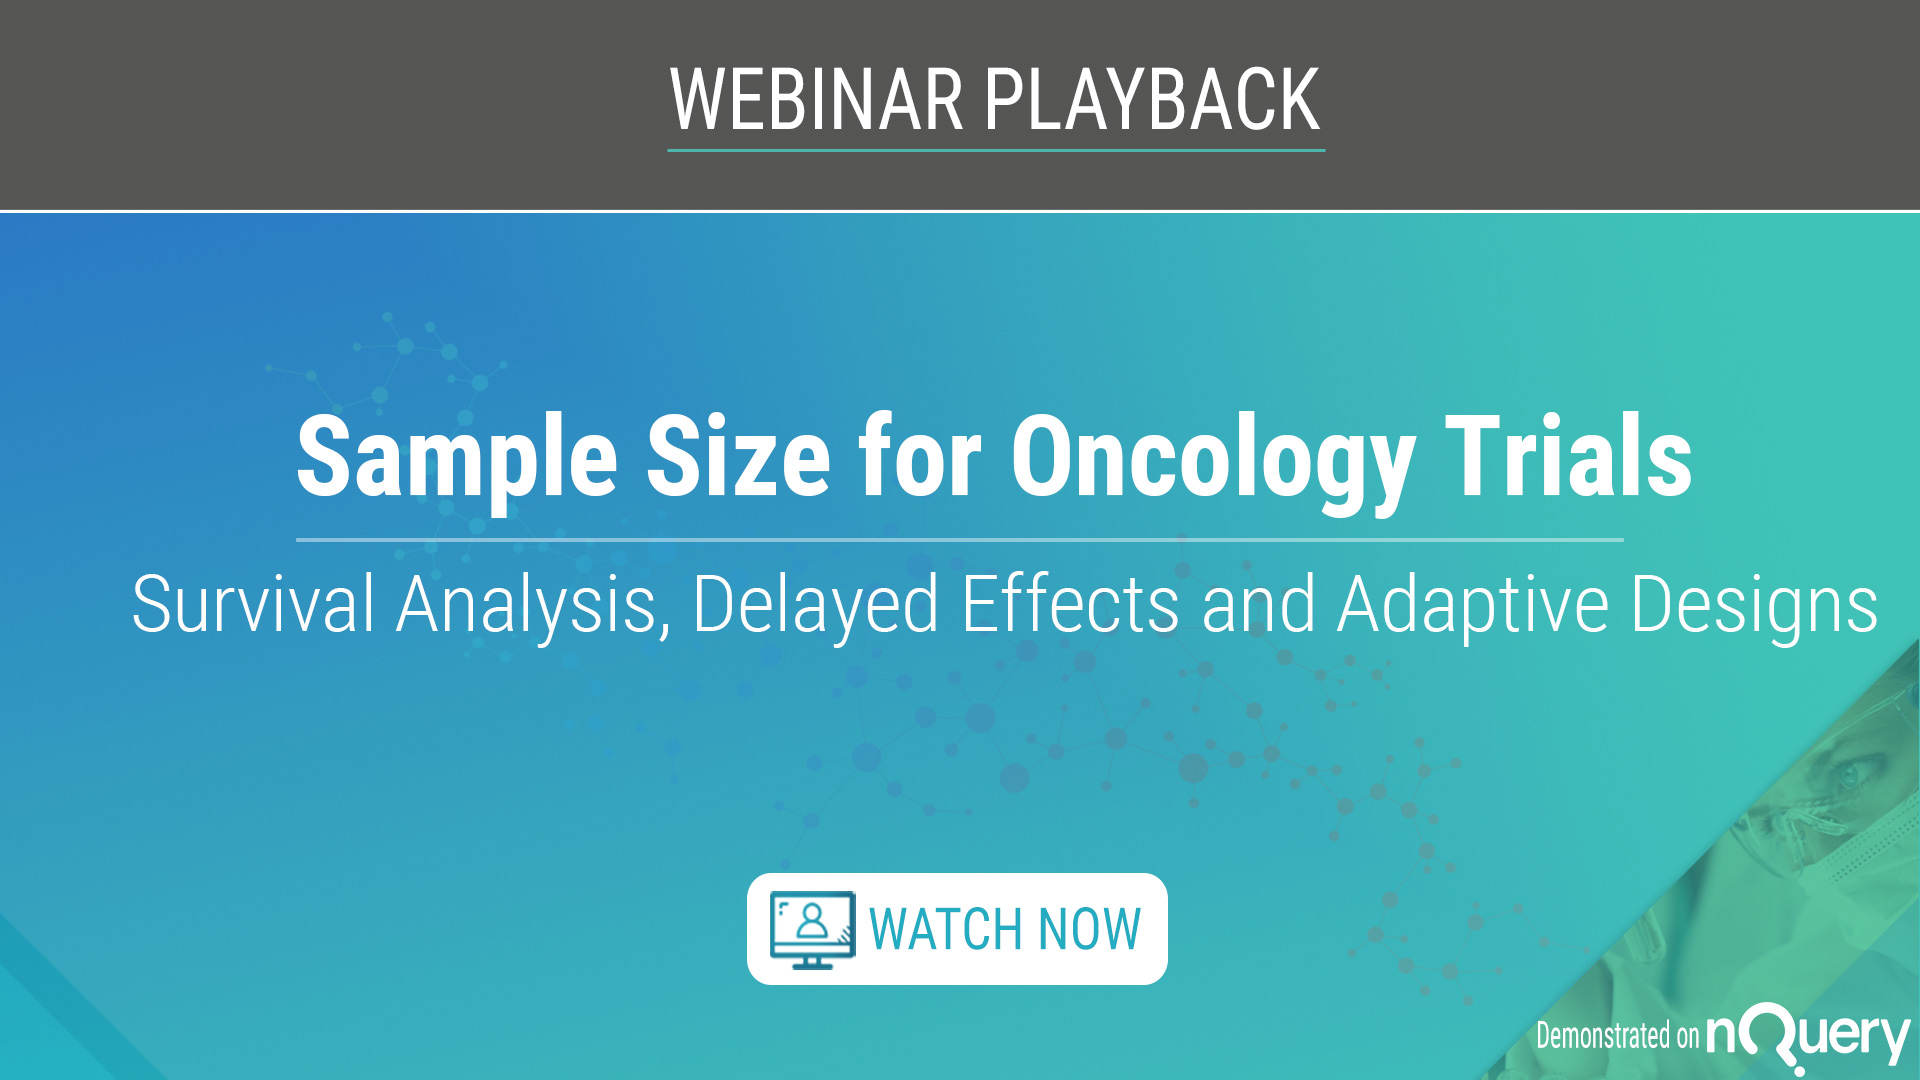 Sample-size-for-oncology-trials-demand